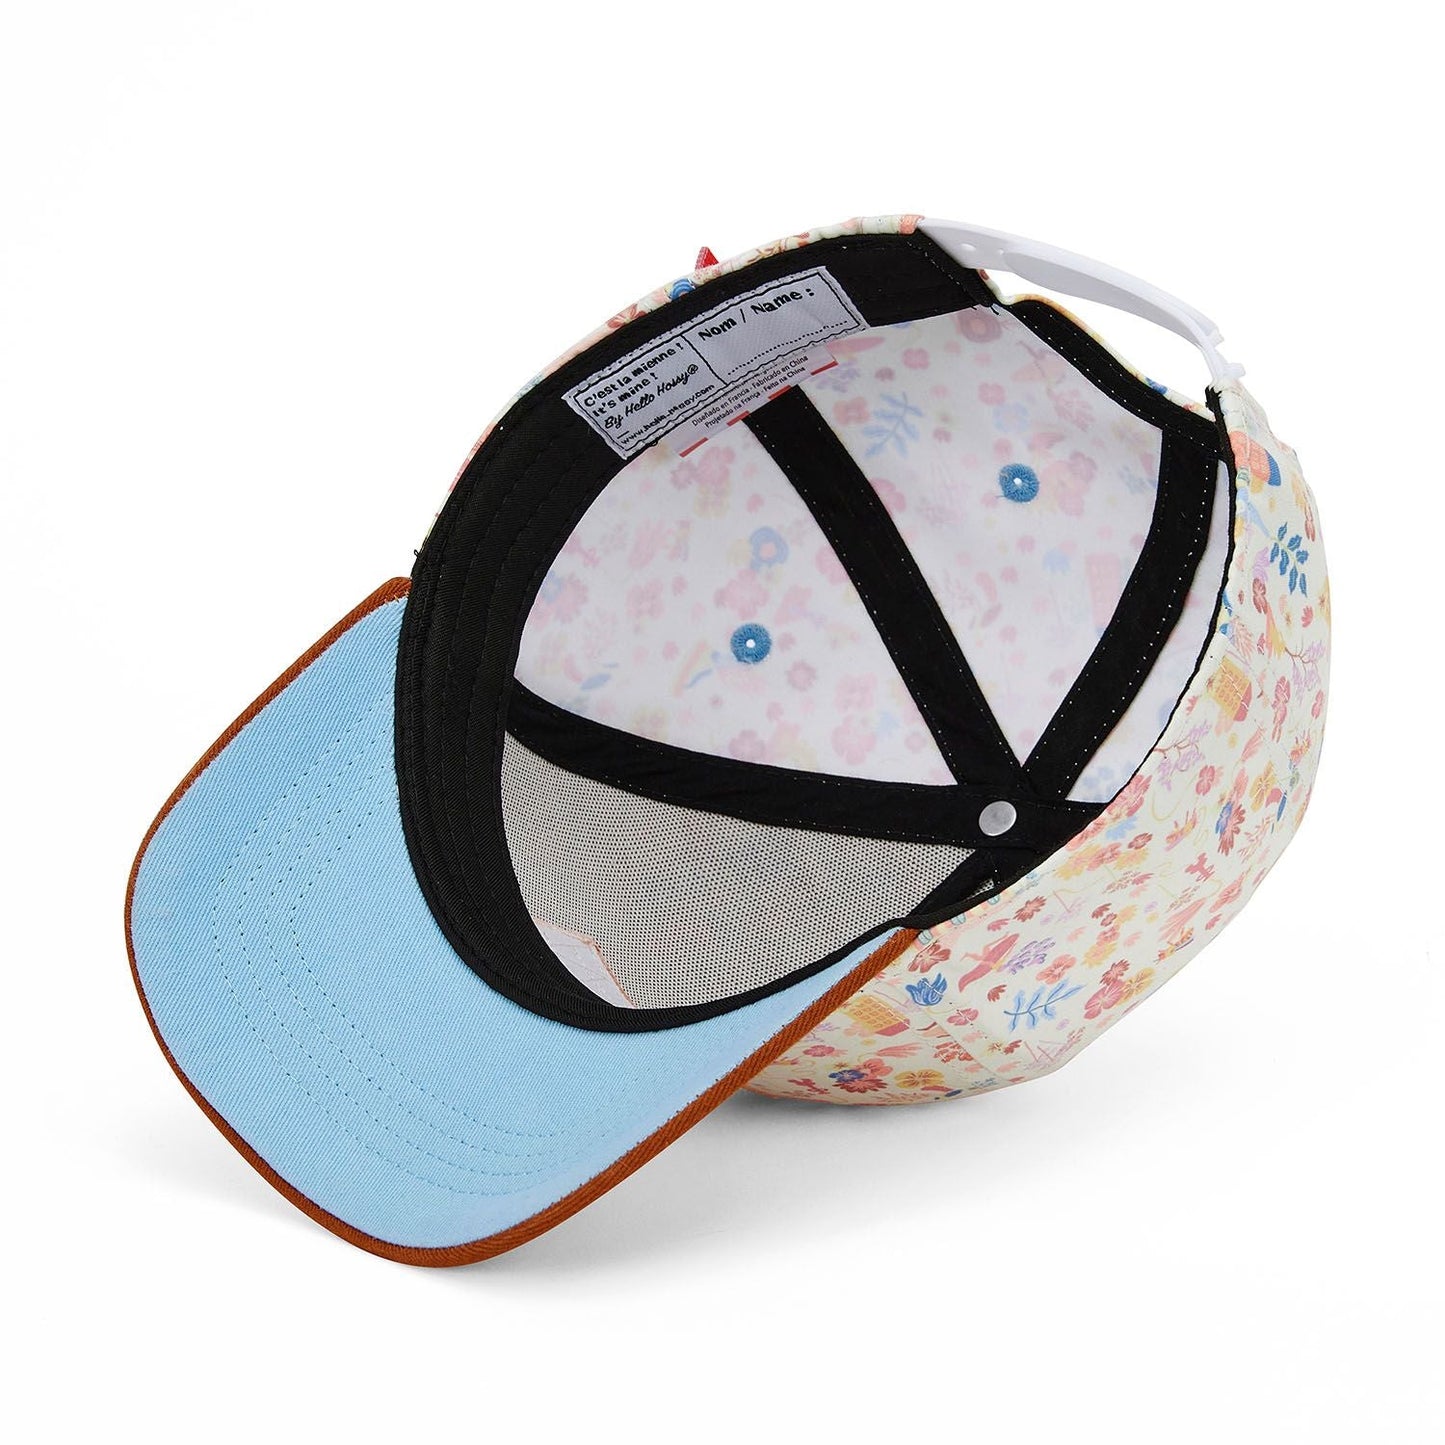 Casquette Dried Flowers Maman - Cool Mums Only - Hello Hossy